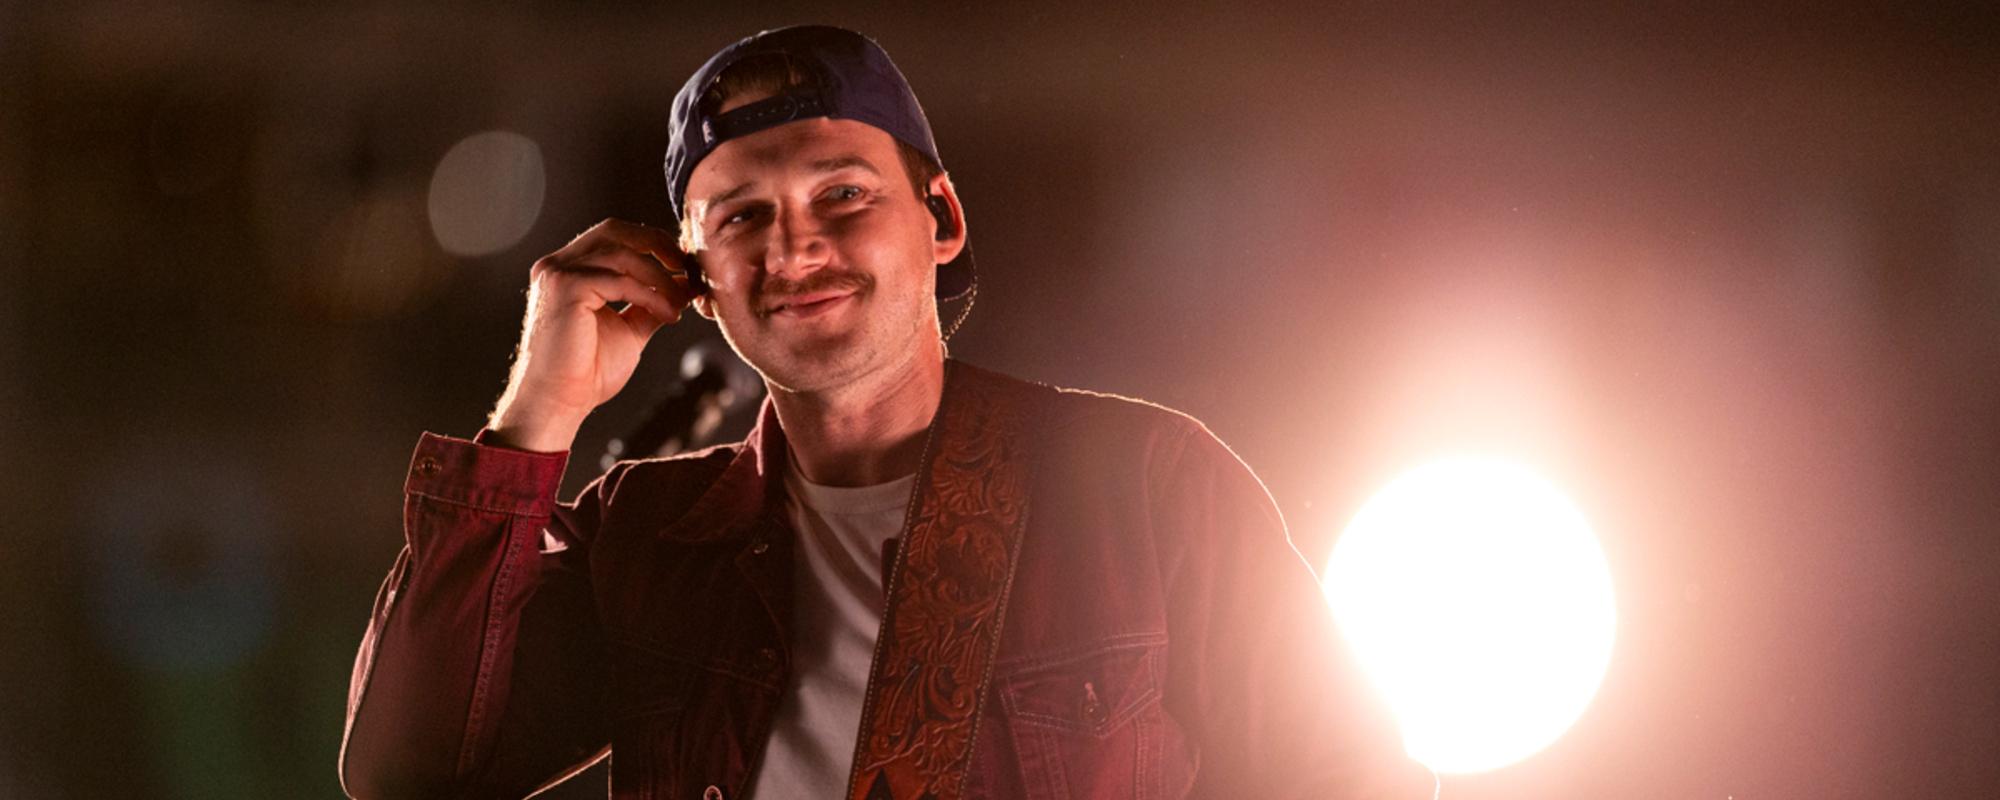 Morgan Wallen Caps Off Unorthodox Billboard Music Awards with 11 Trophies and Performance of “98 Braves”